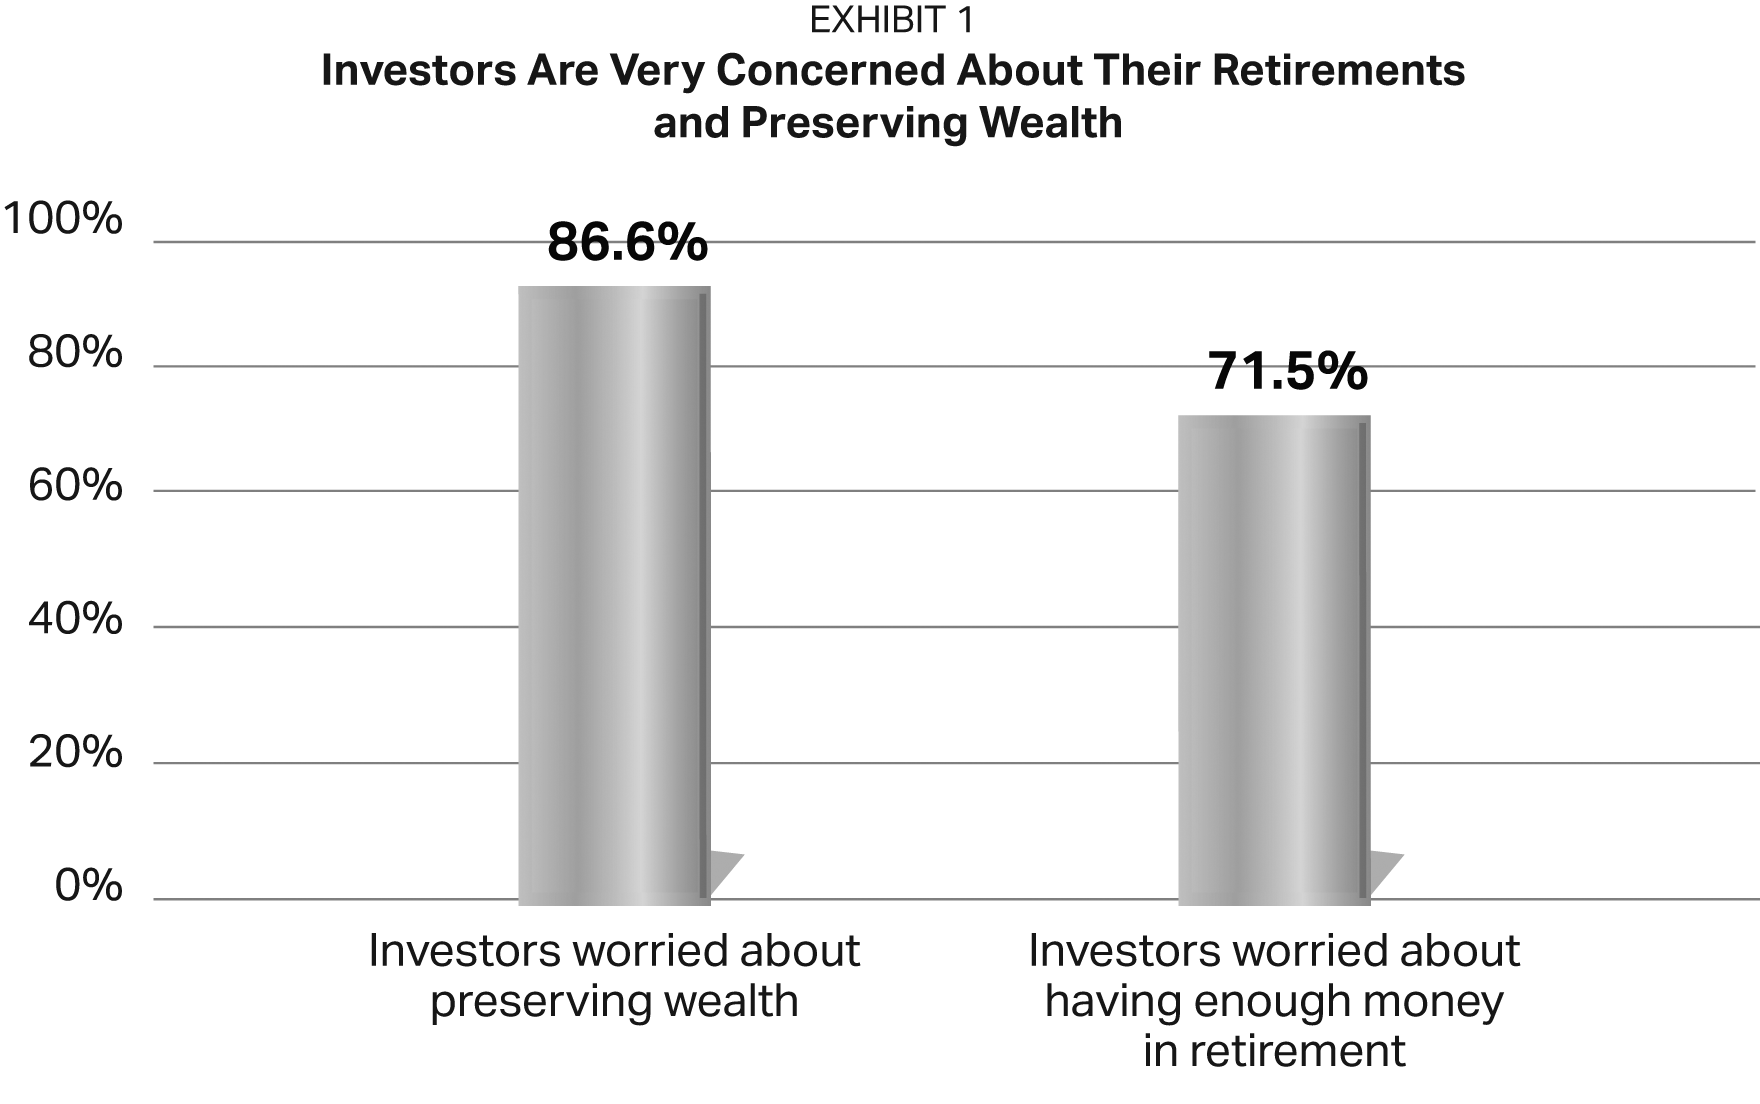 Investors are very concerned about their retirement